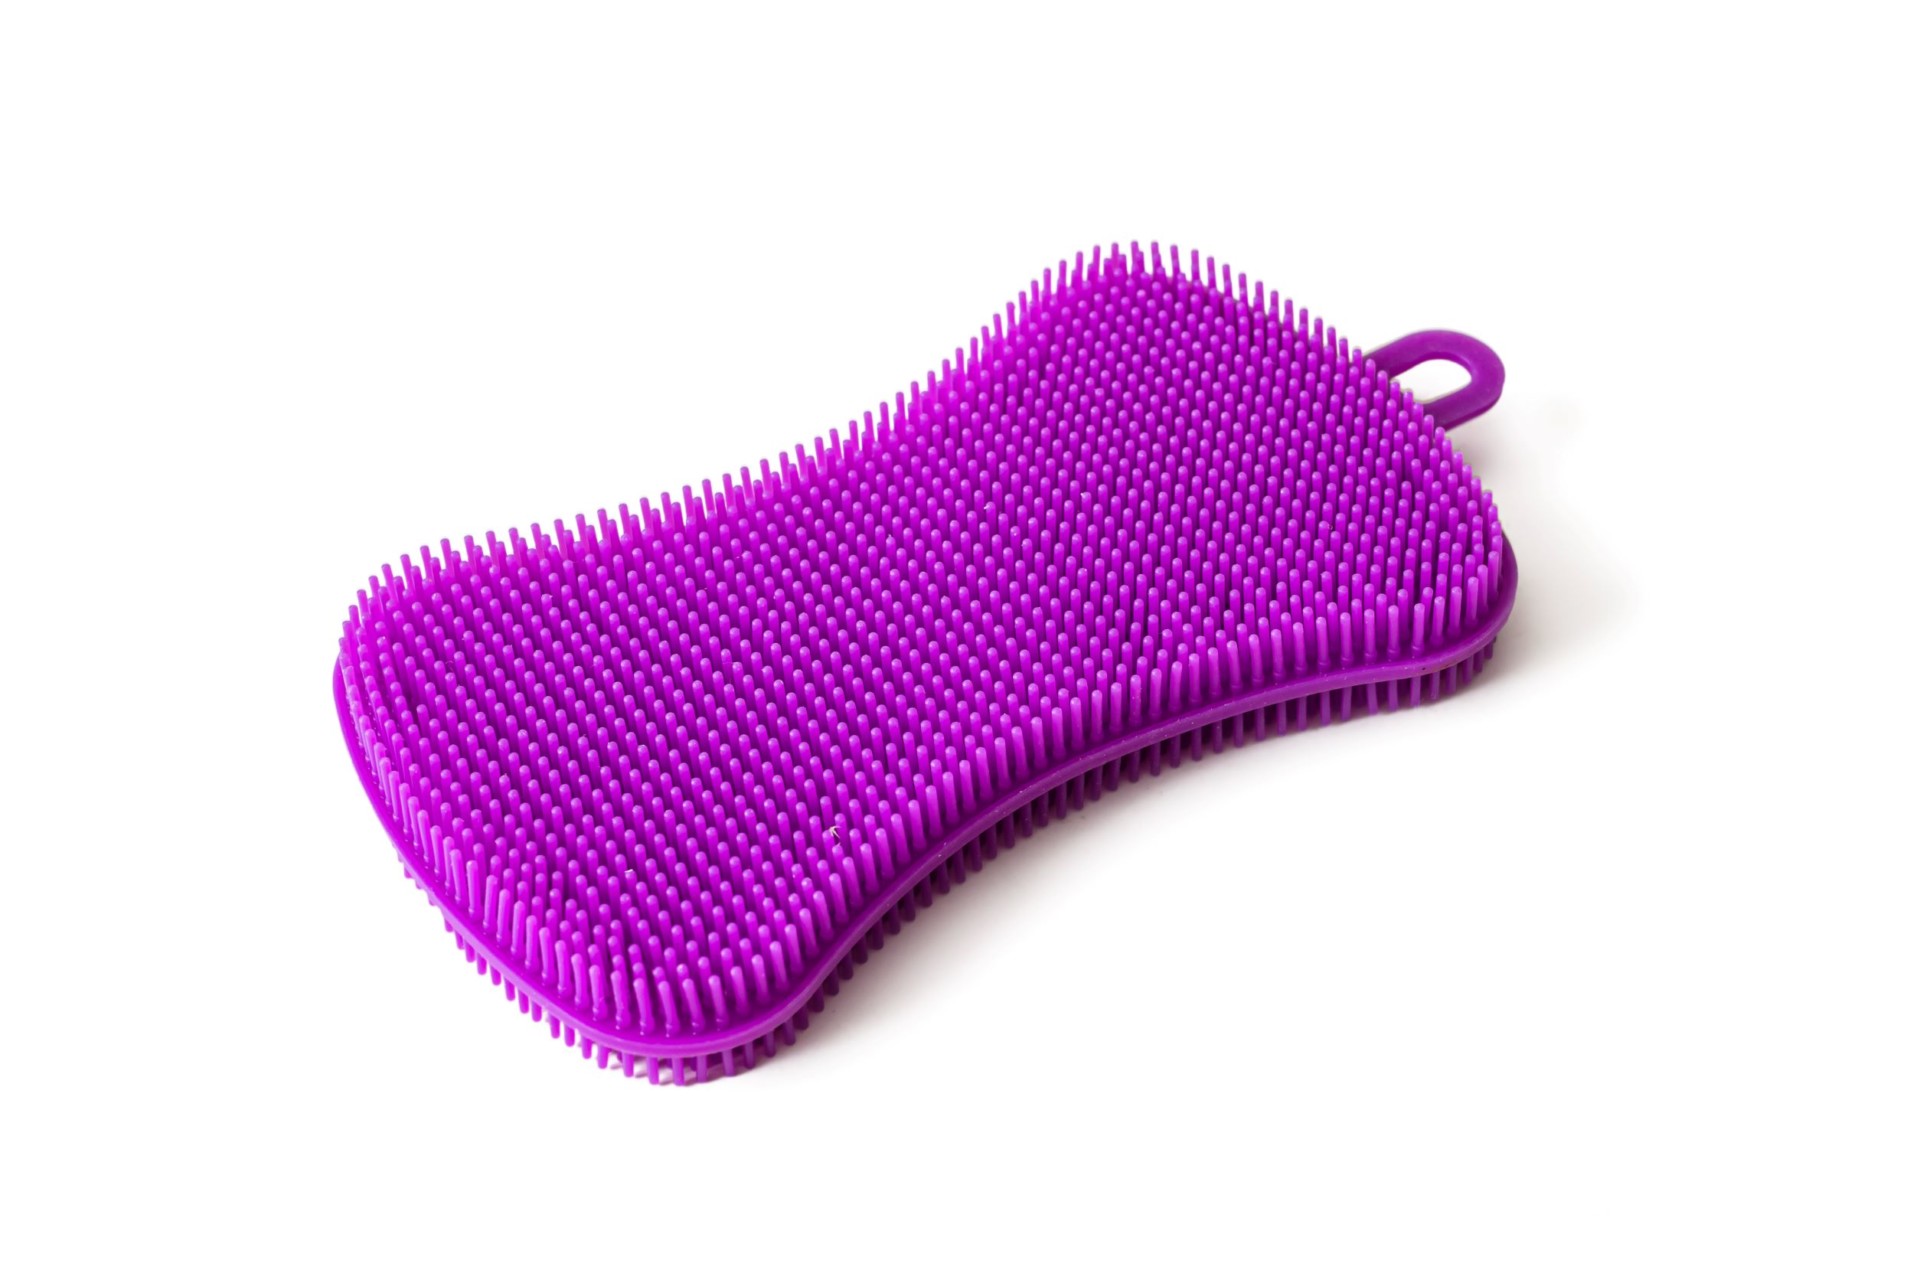 http://citizensustainable.com/wp-content/uploads/2022/04/Are-Silicone-Sponges-Eco-Friendly.jpg